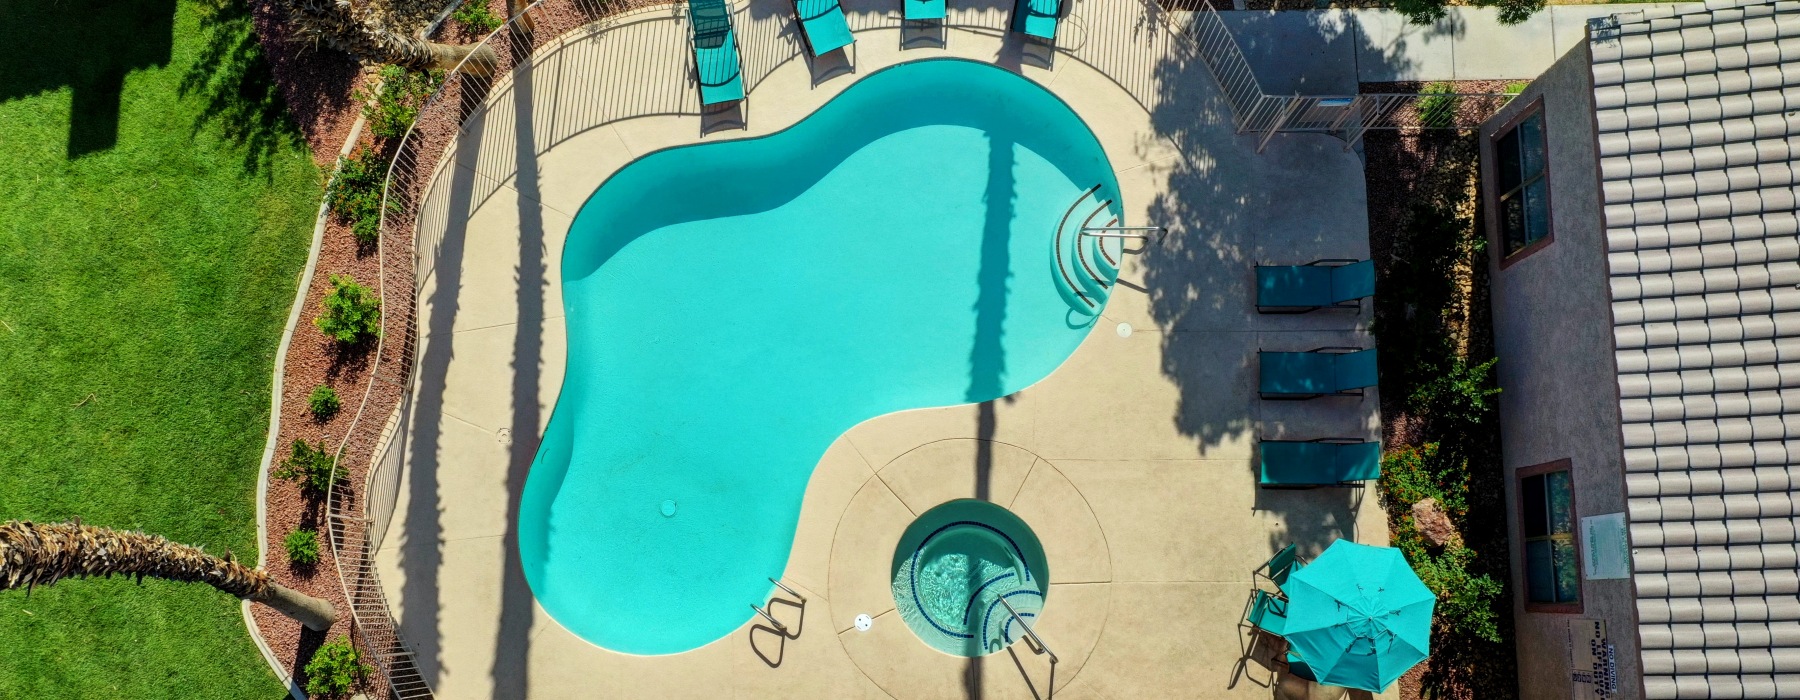 Pool and spa from above